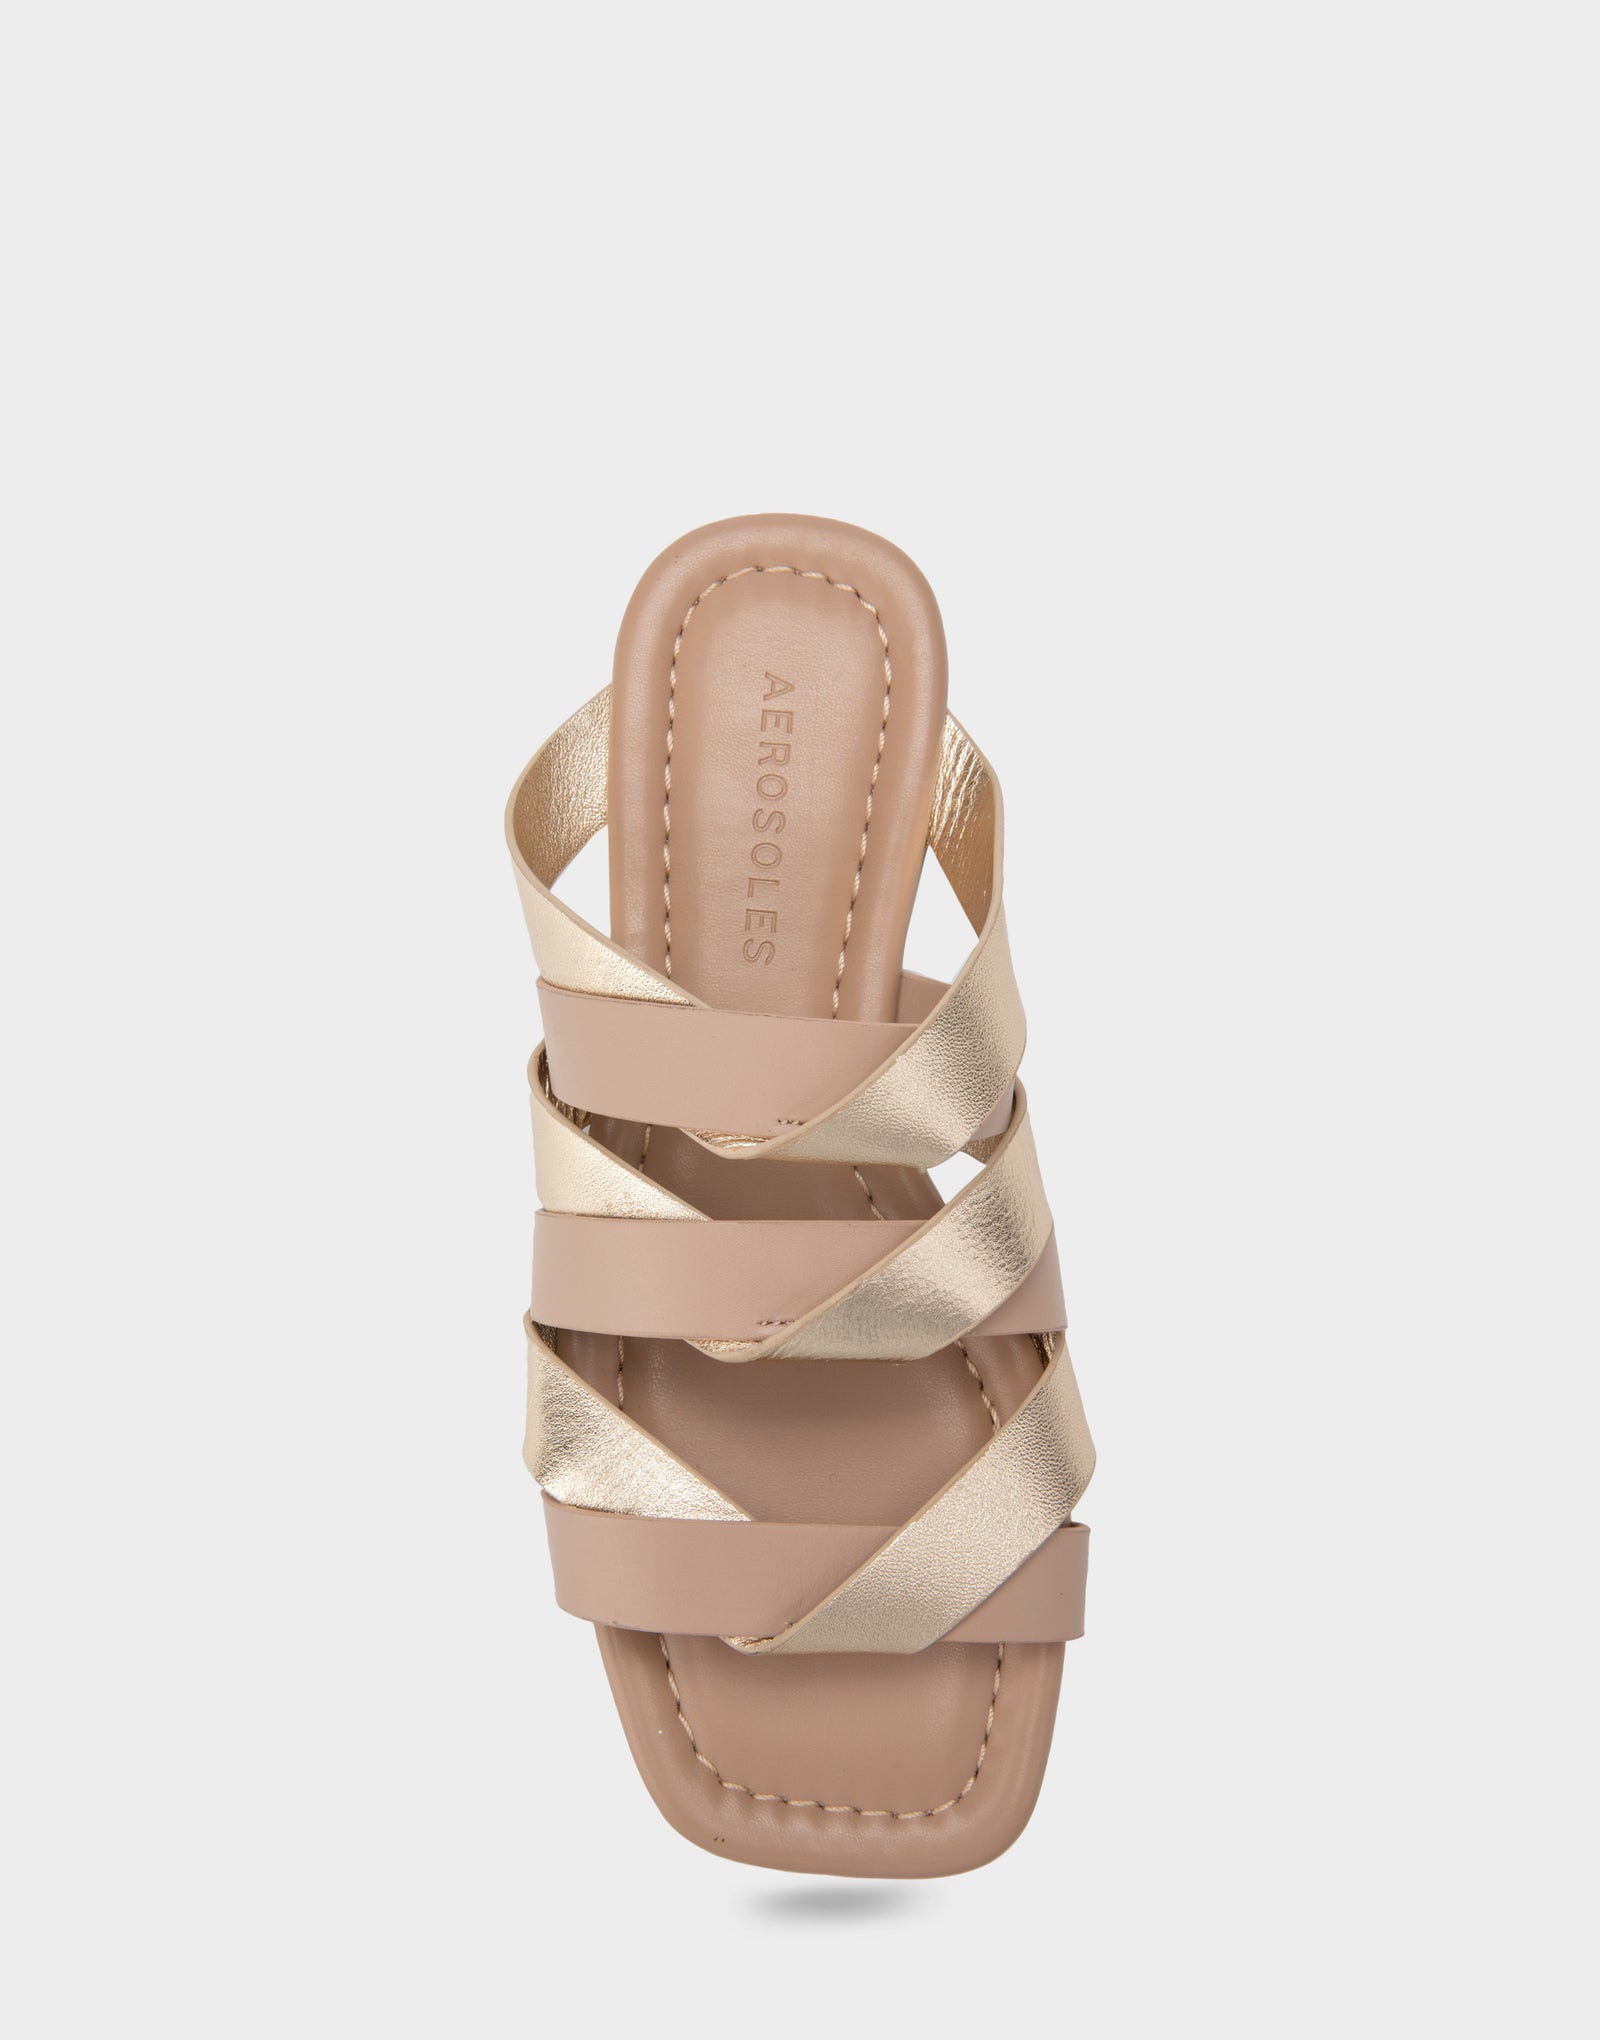 Women's Flat Sandal in Taupe